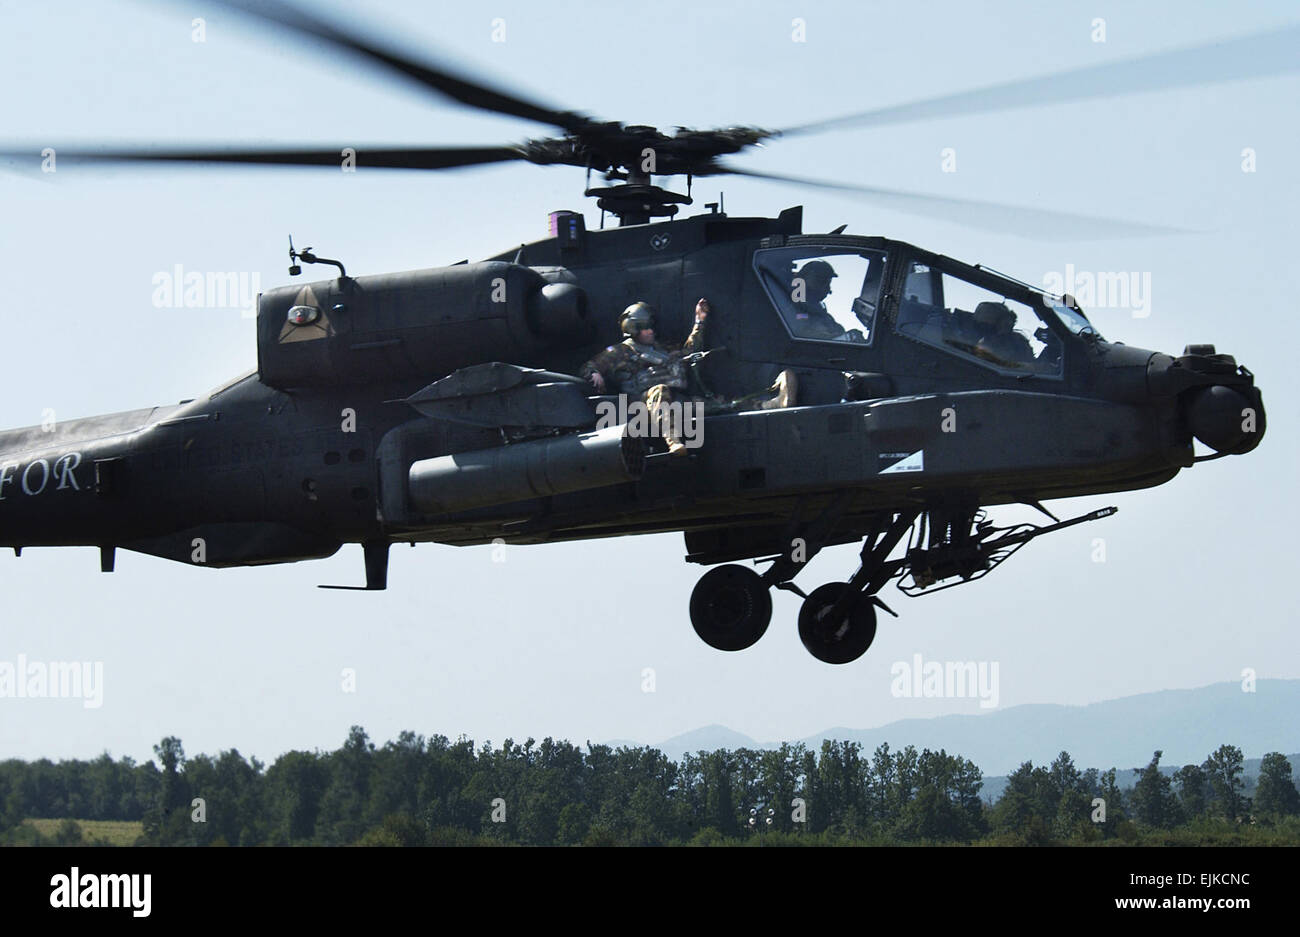 Capt. Sean Spence, the TF Eage, B Co. commander, rides shotgun on an AH-64 Apache during an Apache extraction exercise Aug. 25 at Camp Bondsteel, Kosovo. Stock Photo